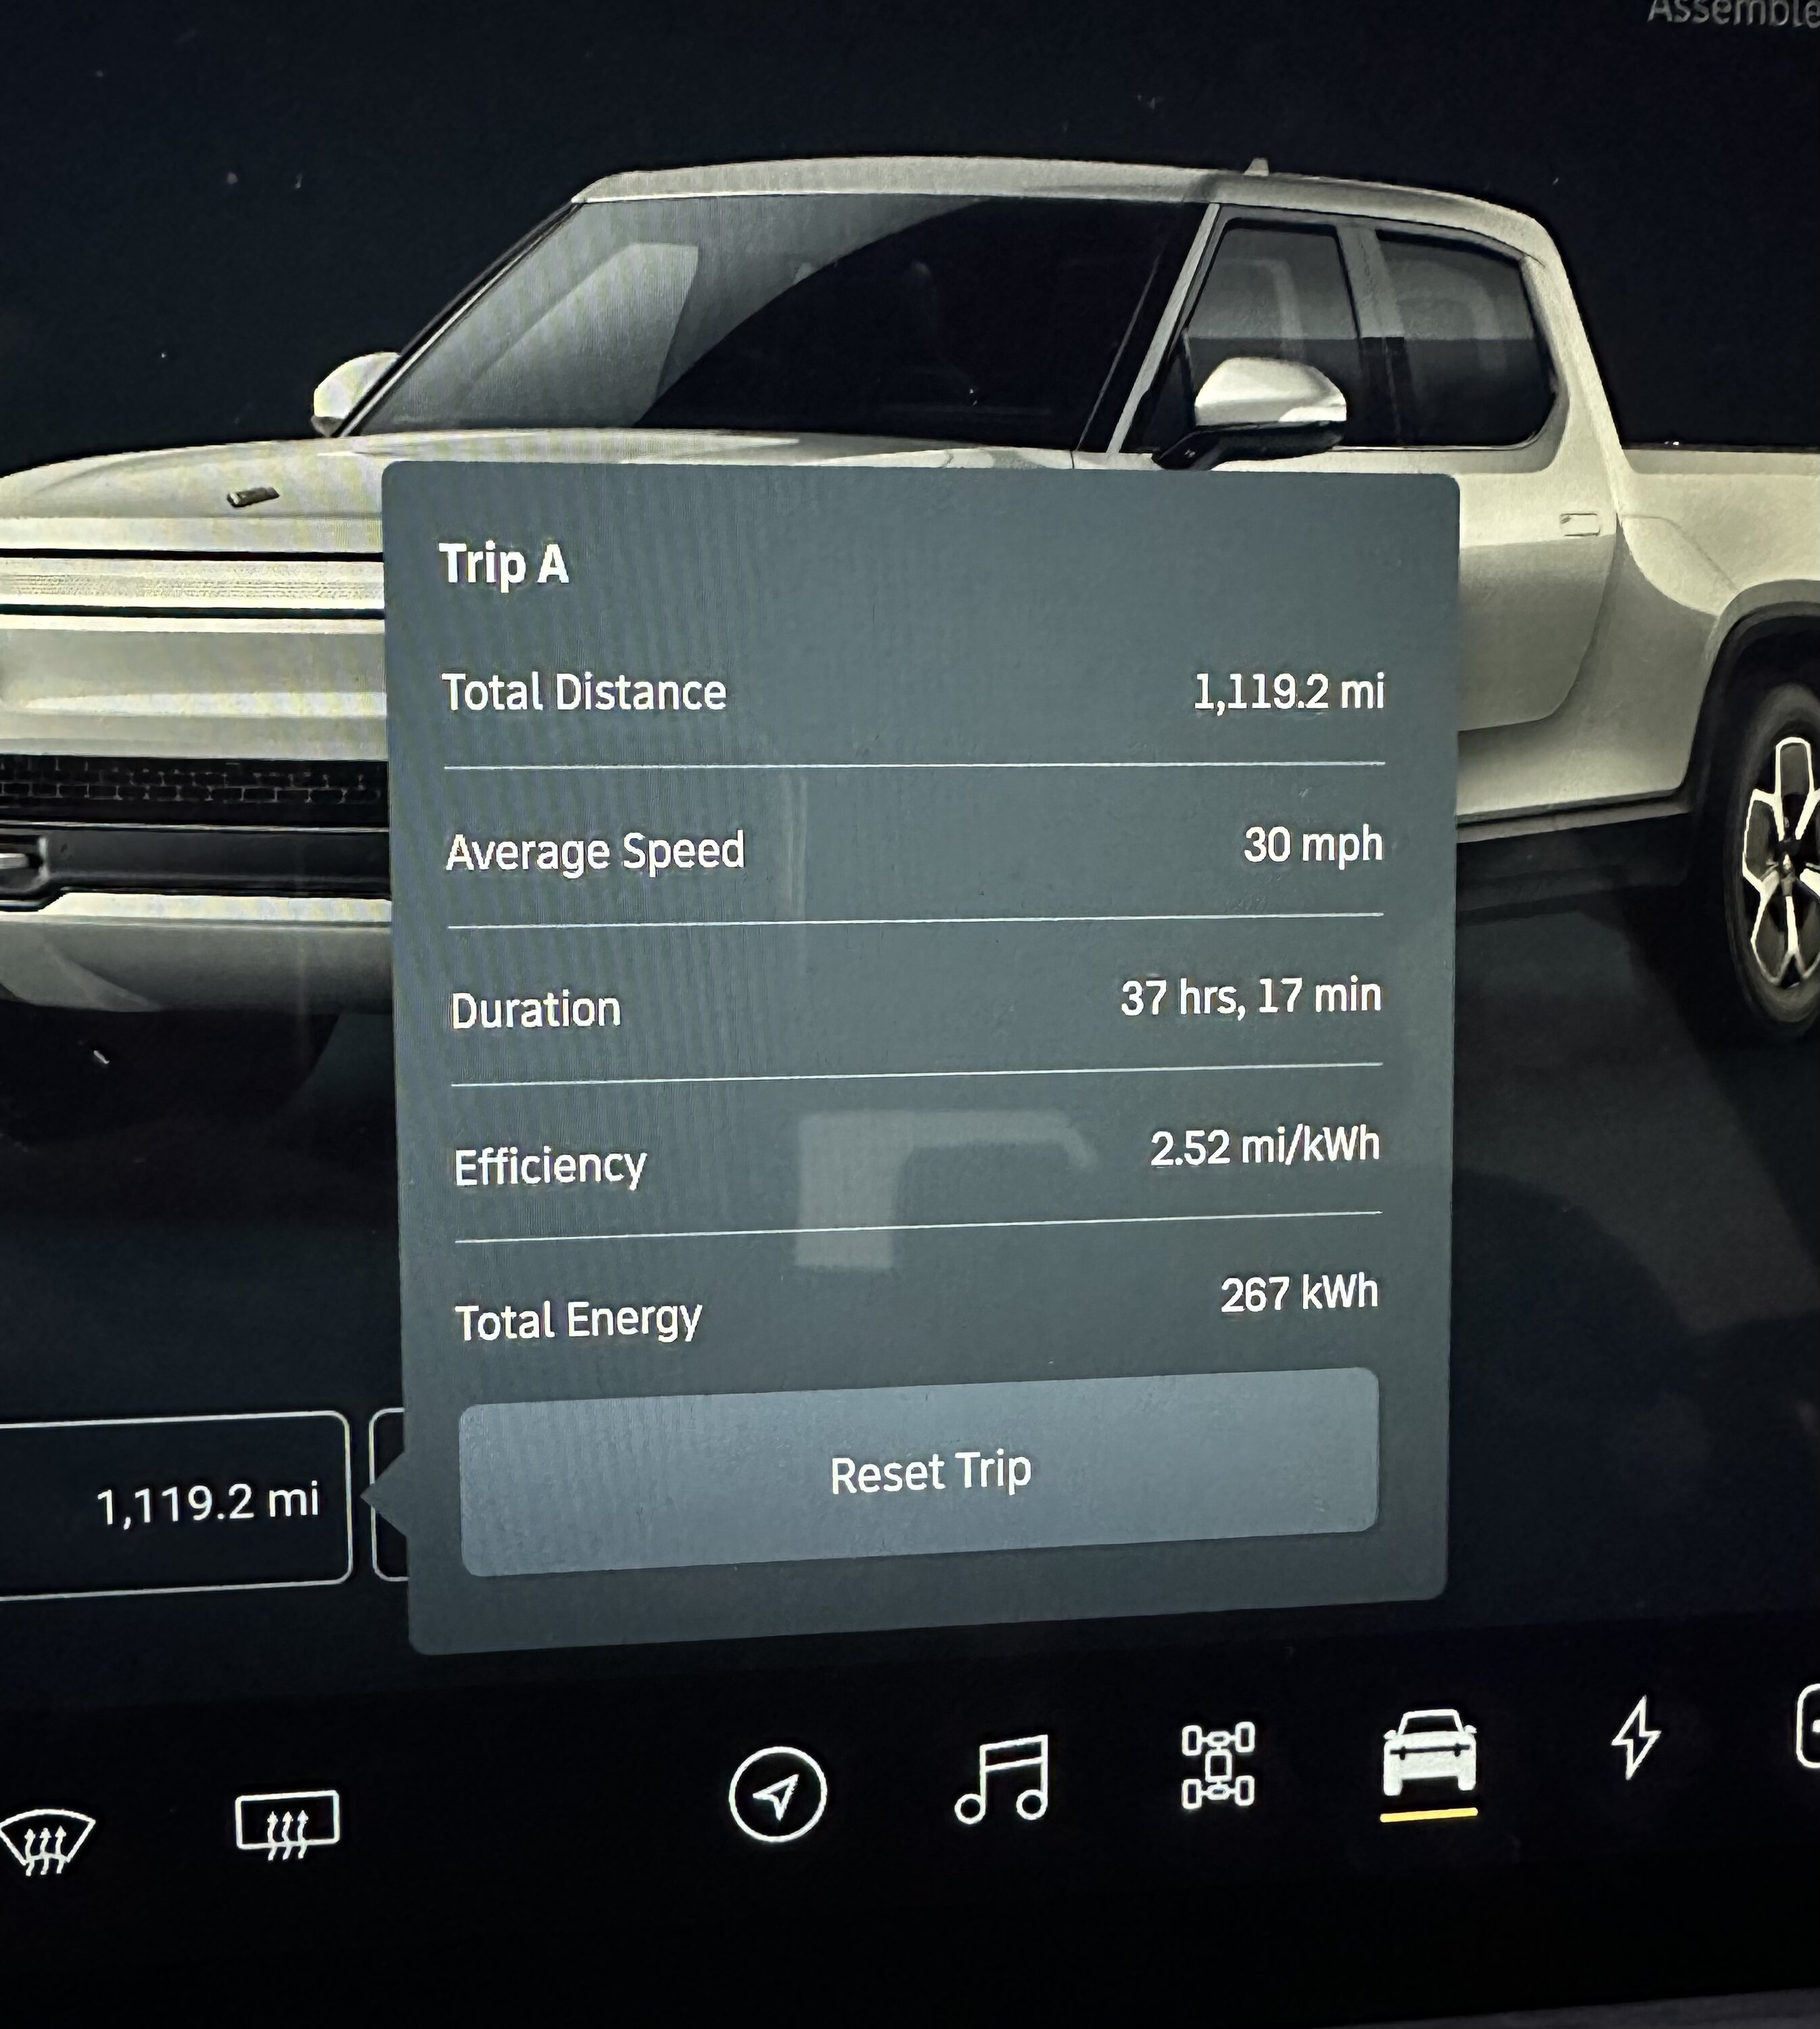 Rivian R1T R1S What is your average miles per kwh? C6F07AF1-AA5E-4116-8E29-01688ABCFBD0